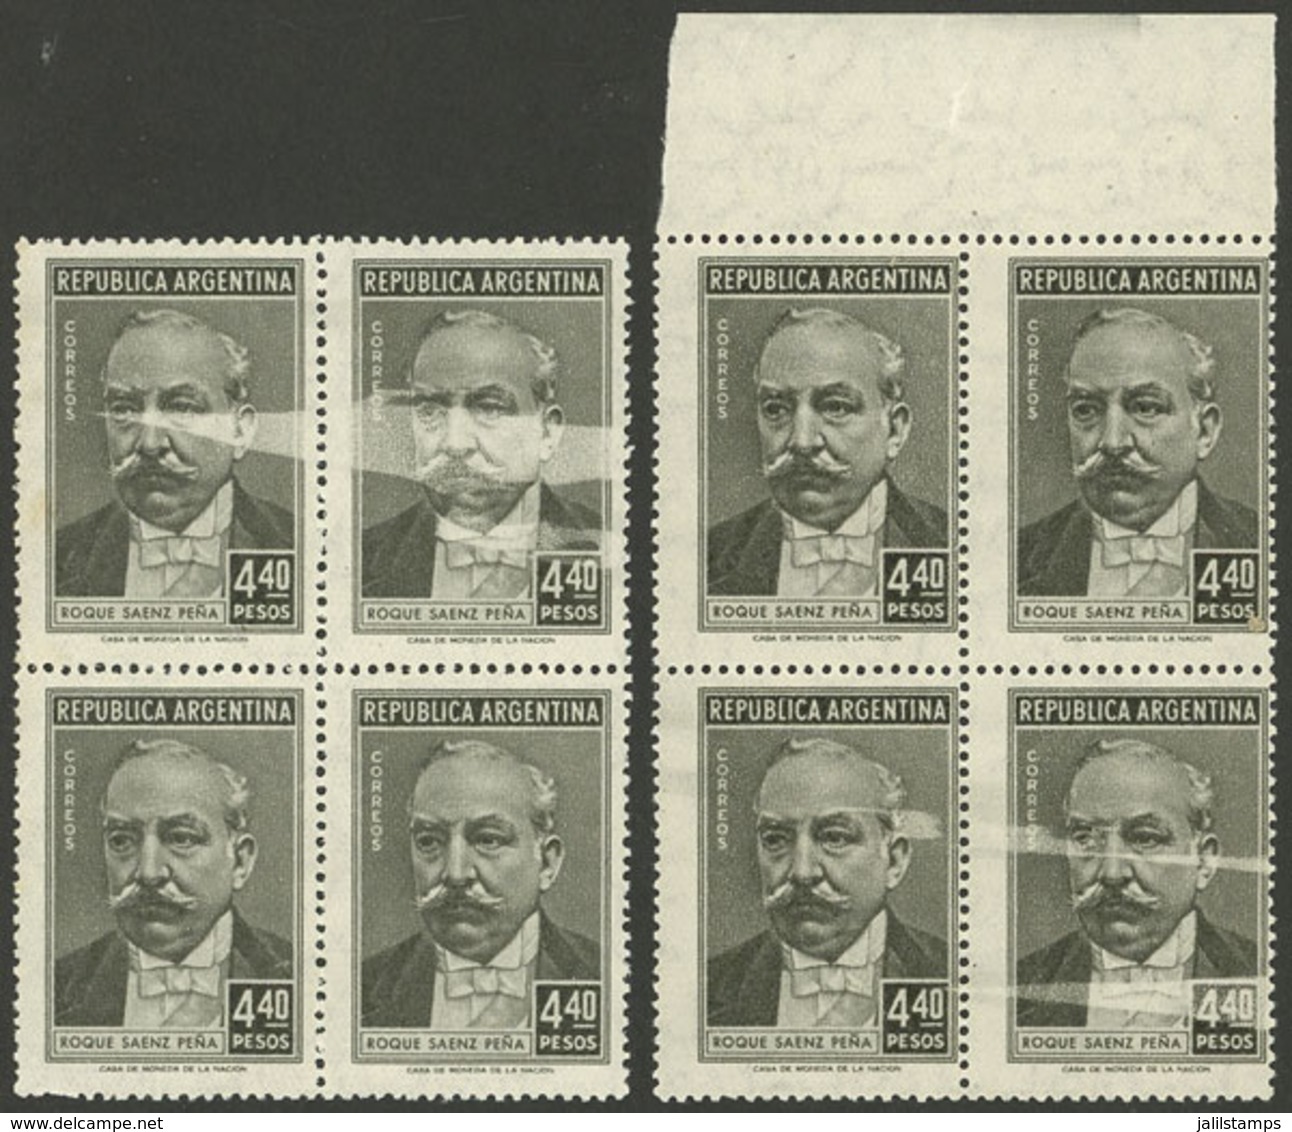 ARGENTINA: GJ.1051P, 4.40P. Saenz Peña, 2 Blocks Of 4 With Notable Spots Produced In The Printing Process, VF! - Unused Stamps